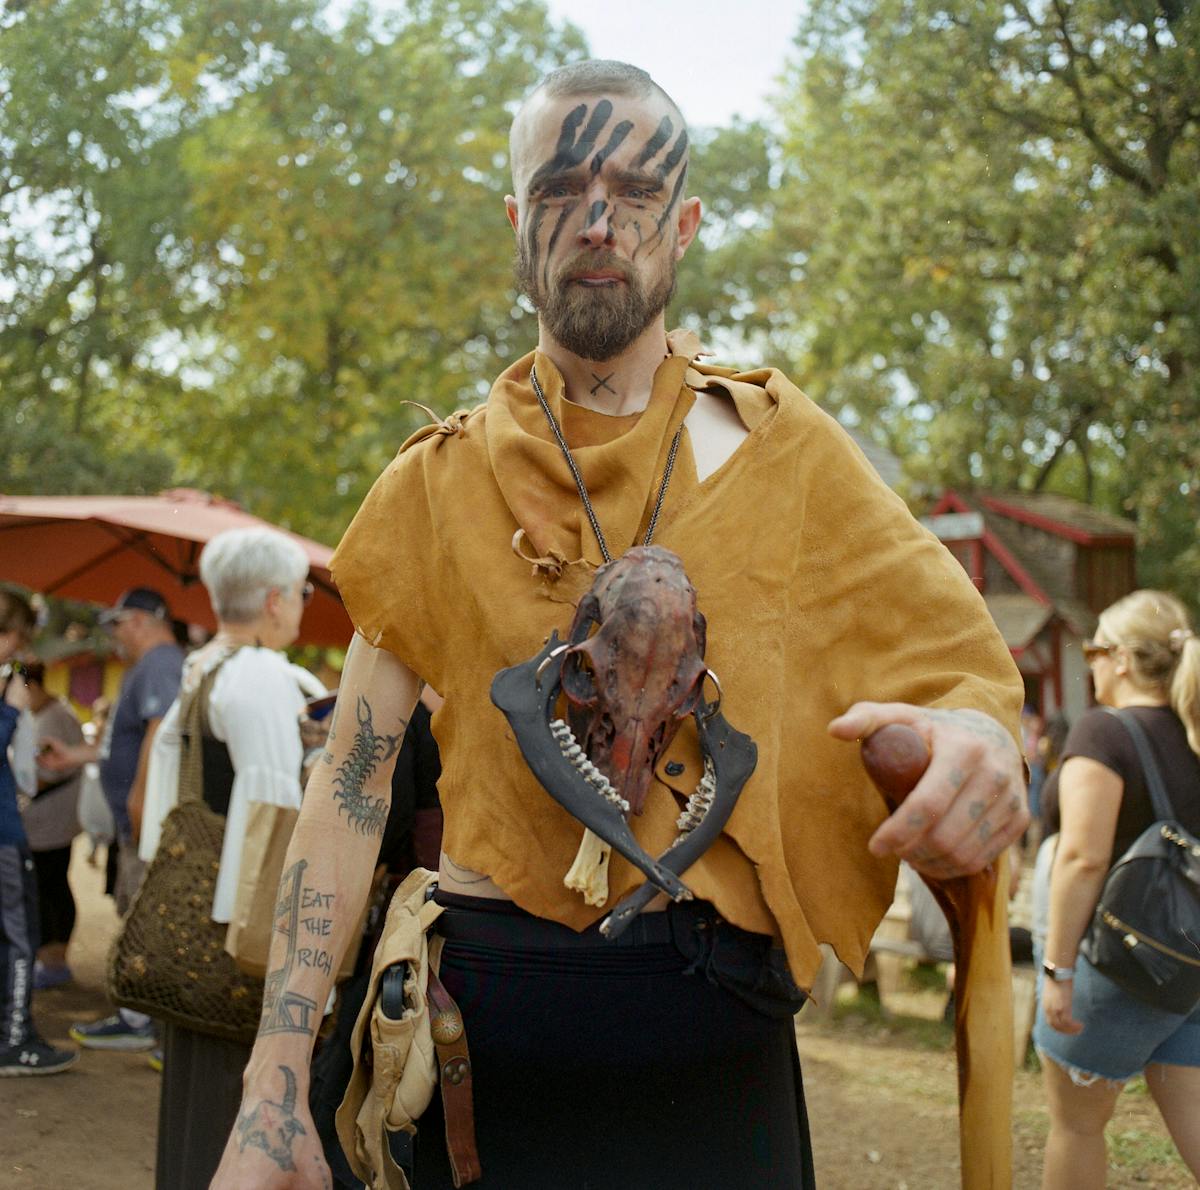 See the best-dressed attendees at the Minnesota Renaissance Festival